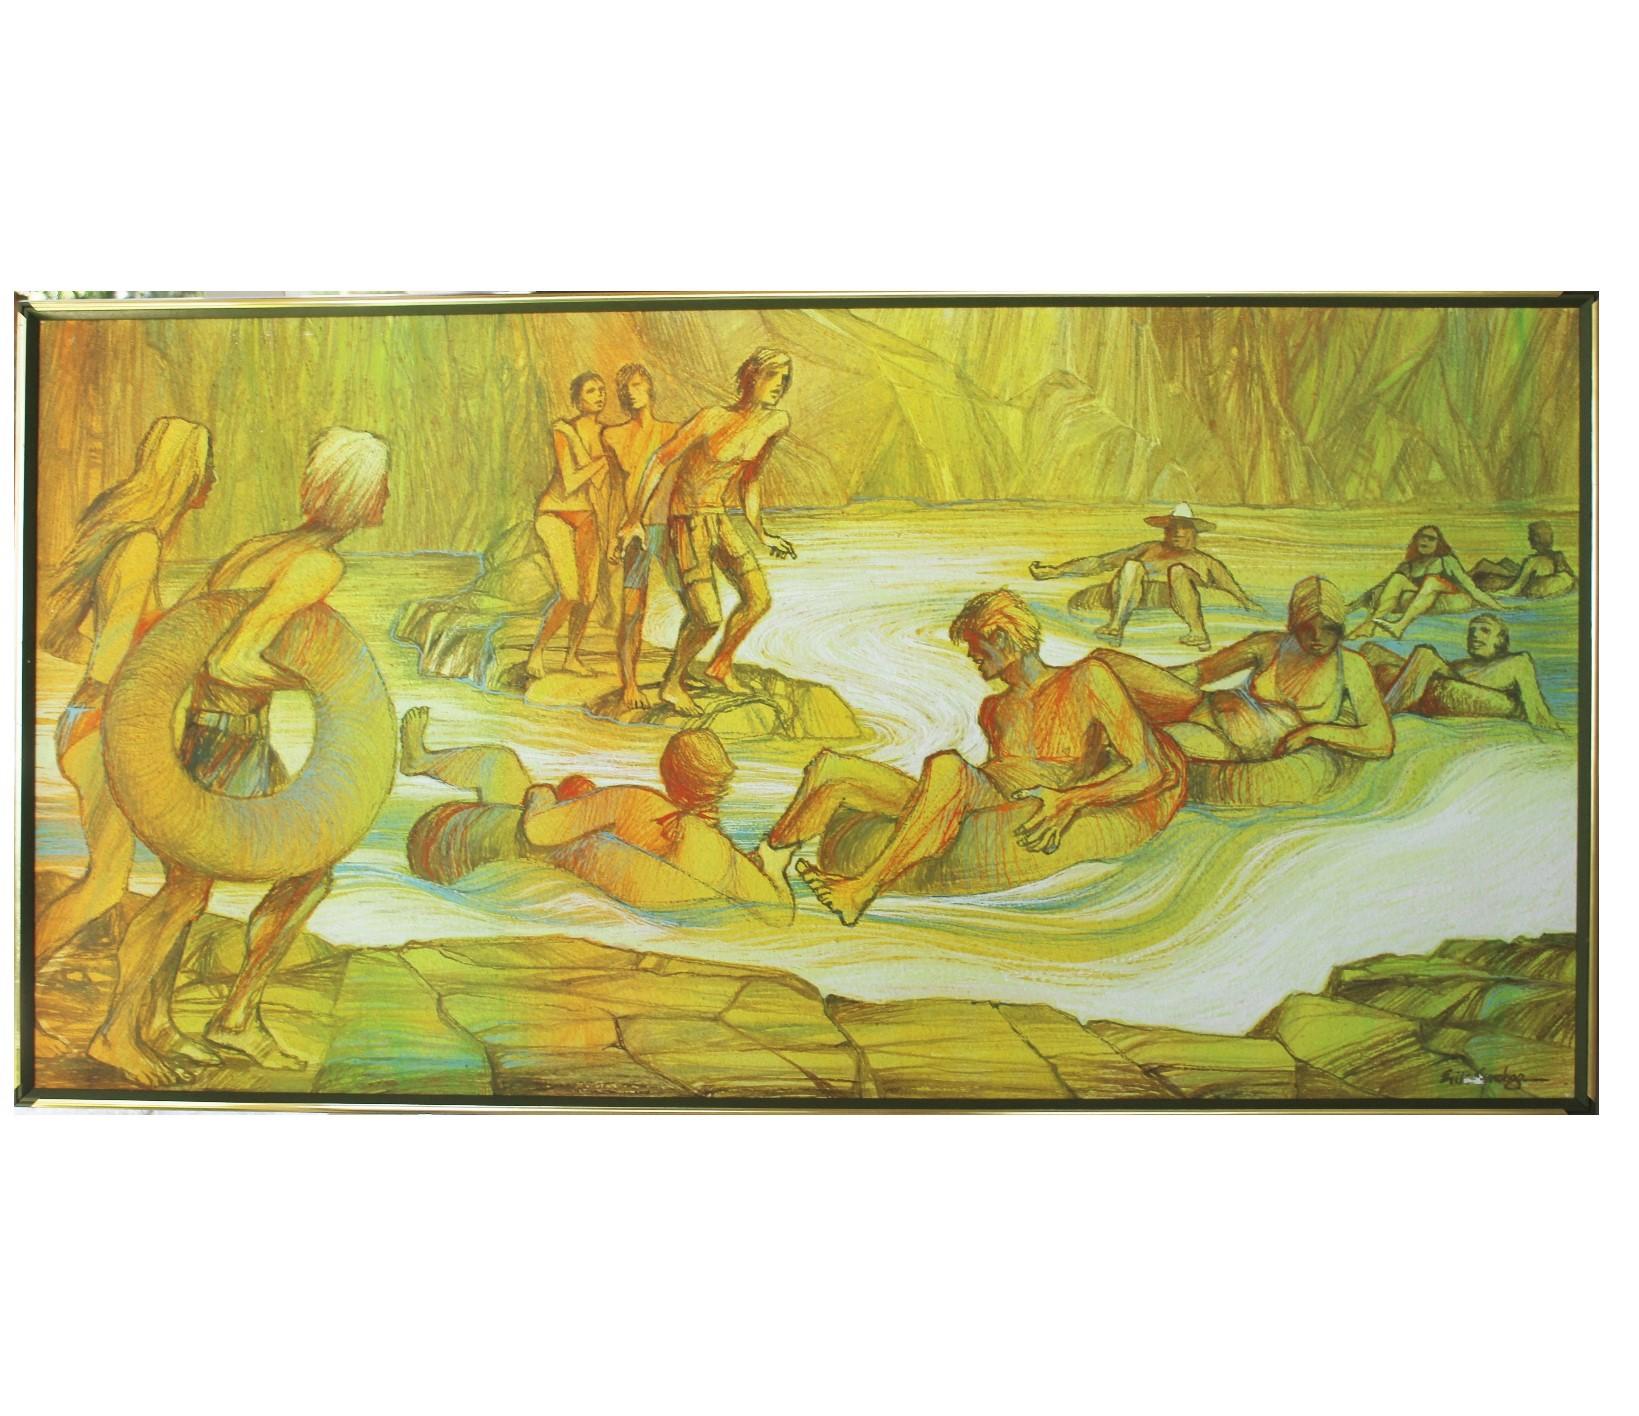 "River Fun" Abstract Figurative Painting in a Green Hue